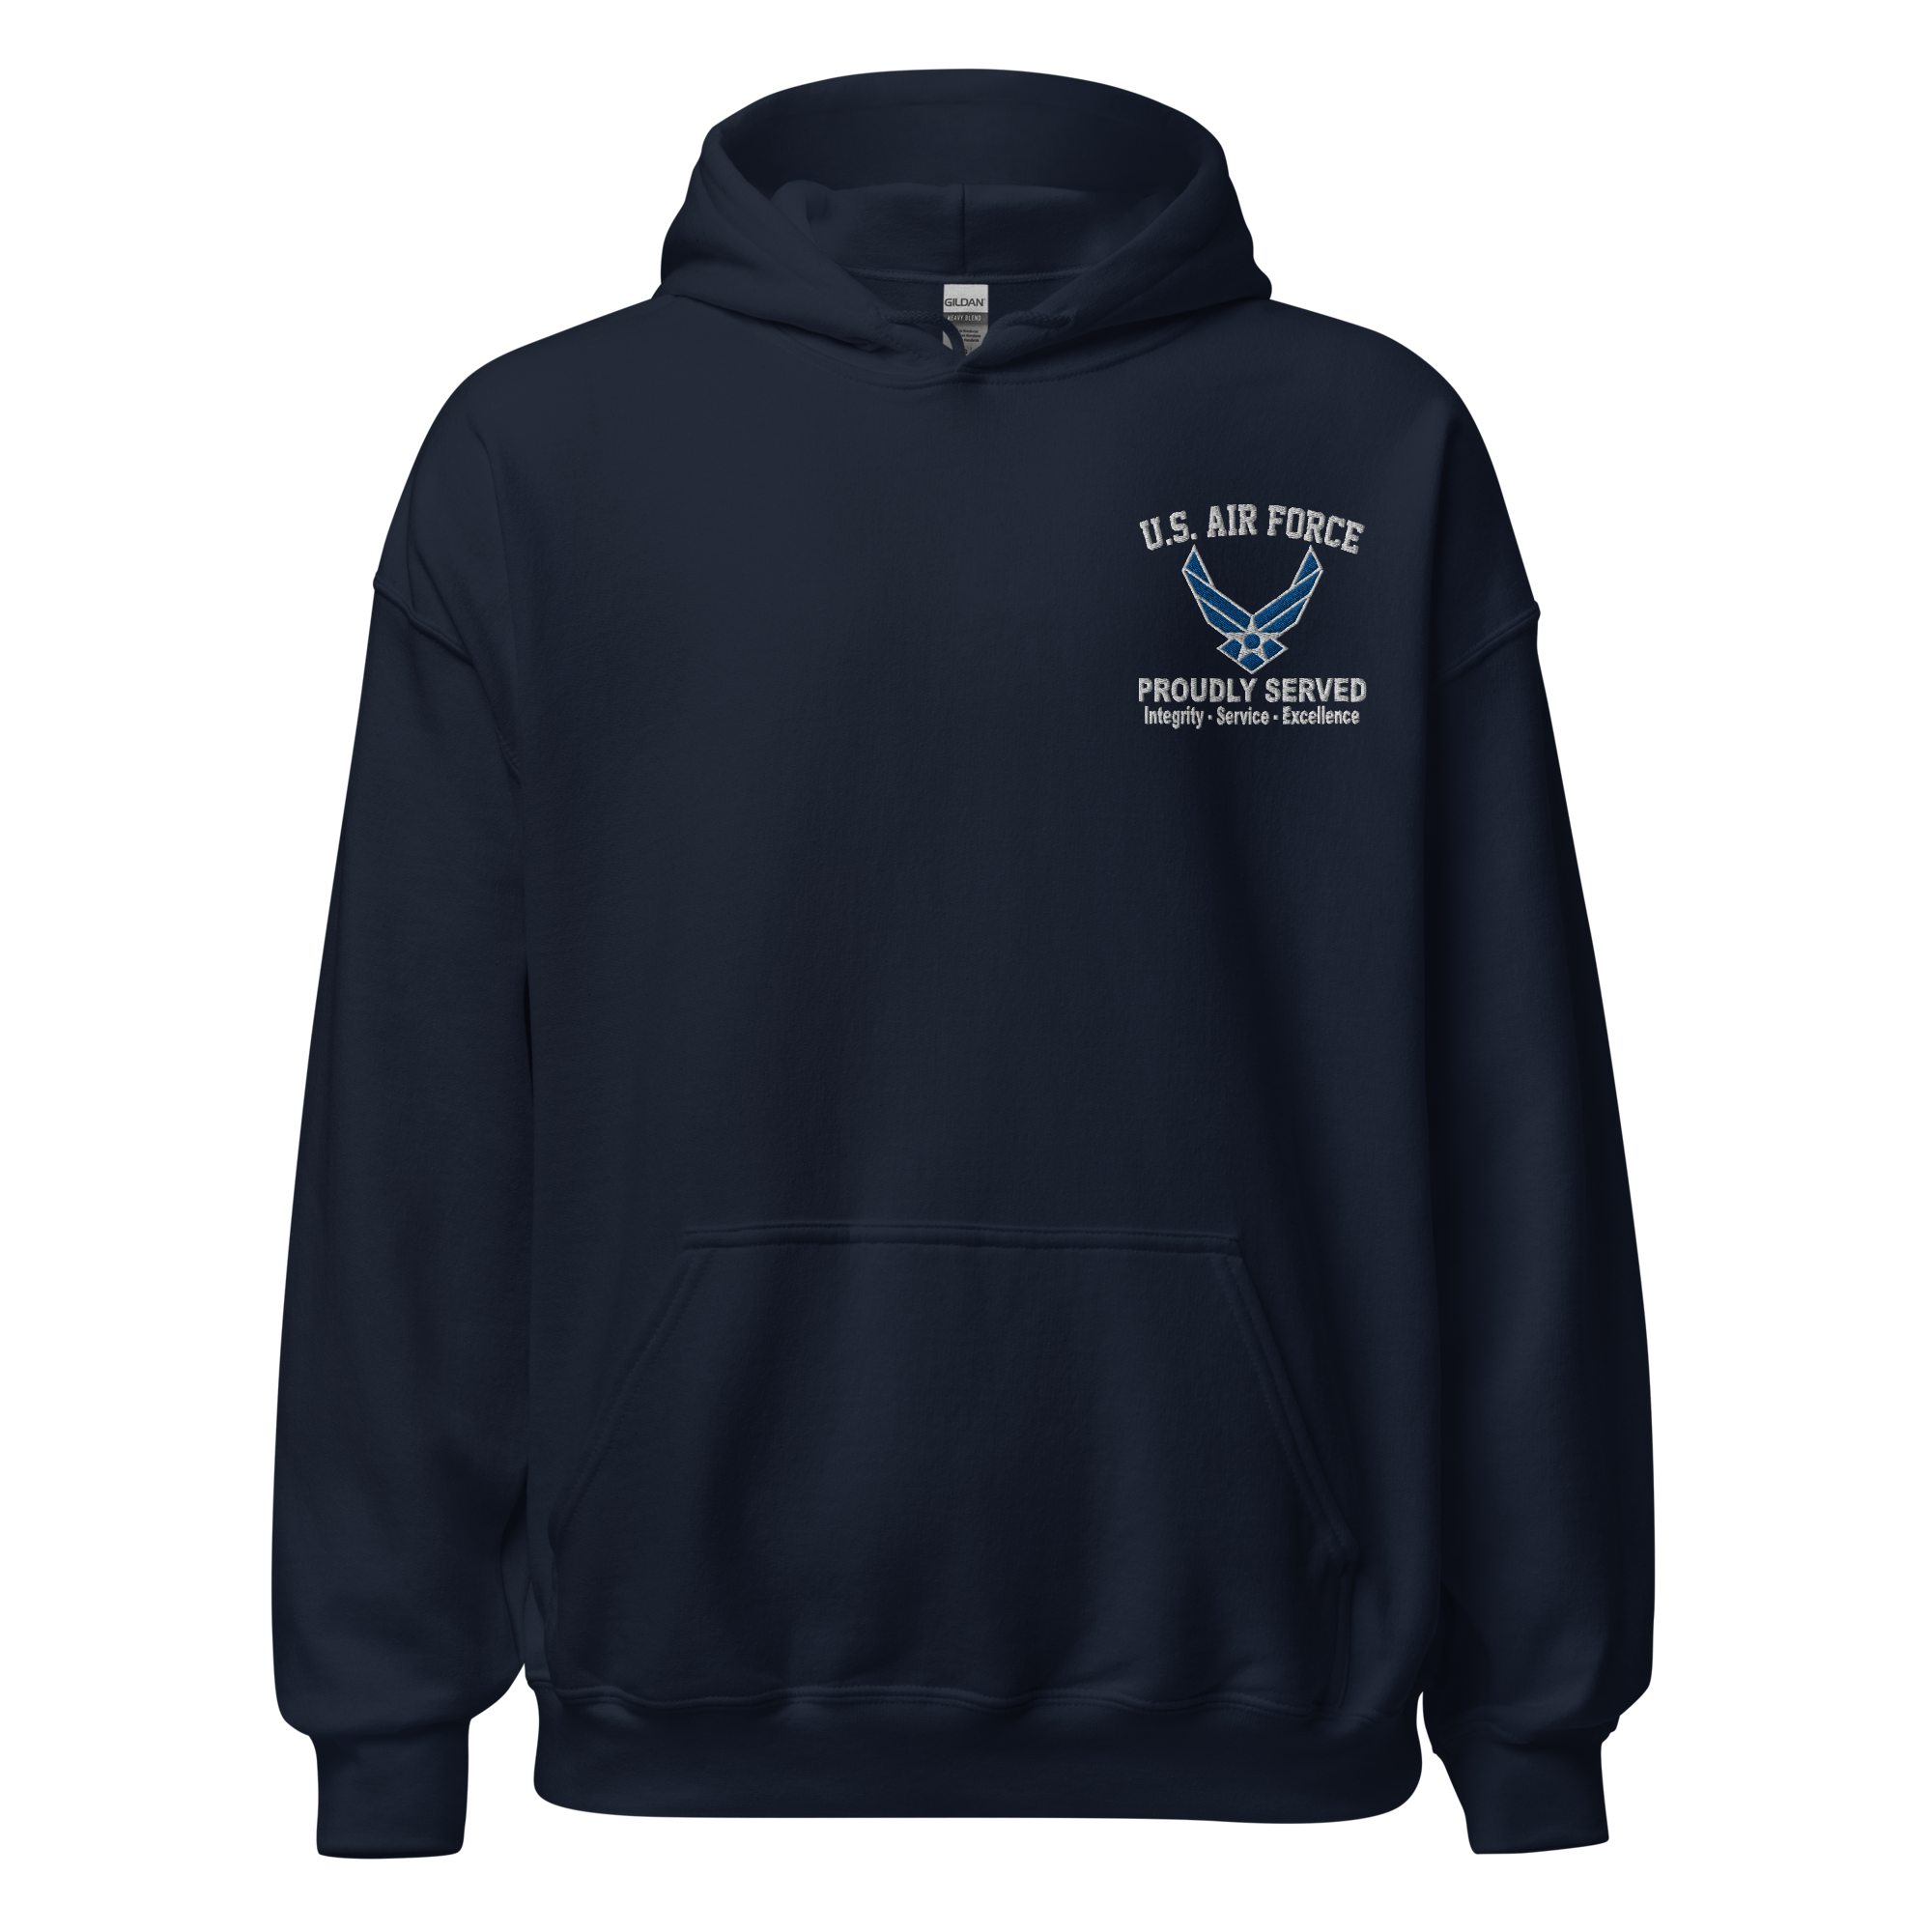 Custom US Air Force Ranks, Insignia Core Values Embroidered Unisex Hoodie